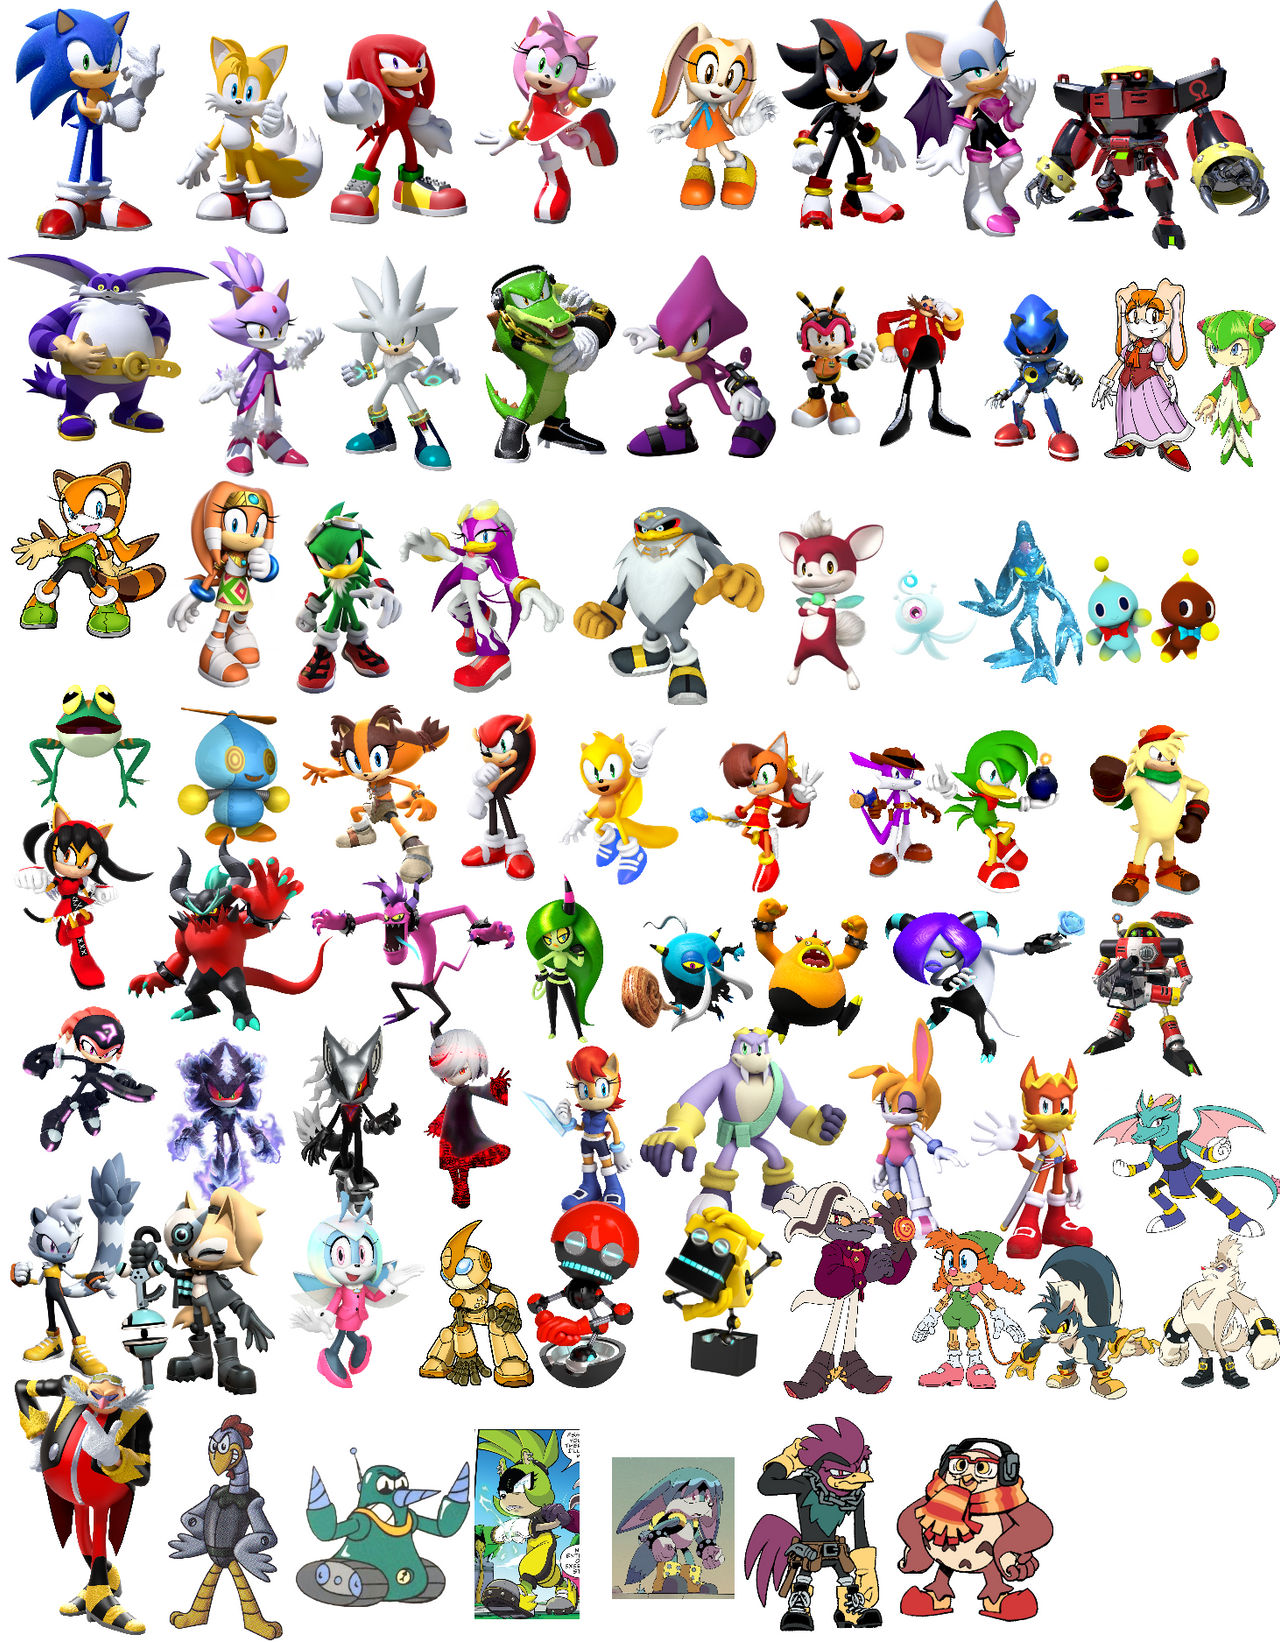 All Sonic Characters by Estebanisawesome on DeviantArt